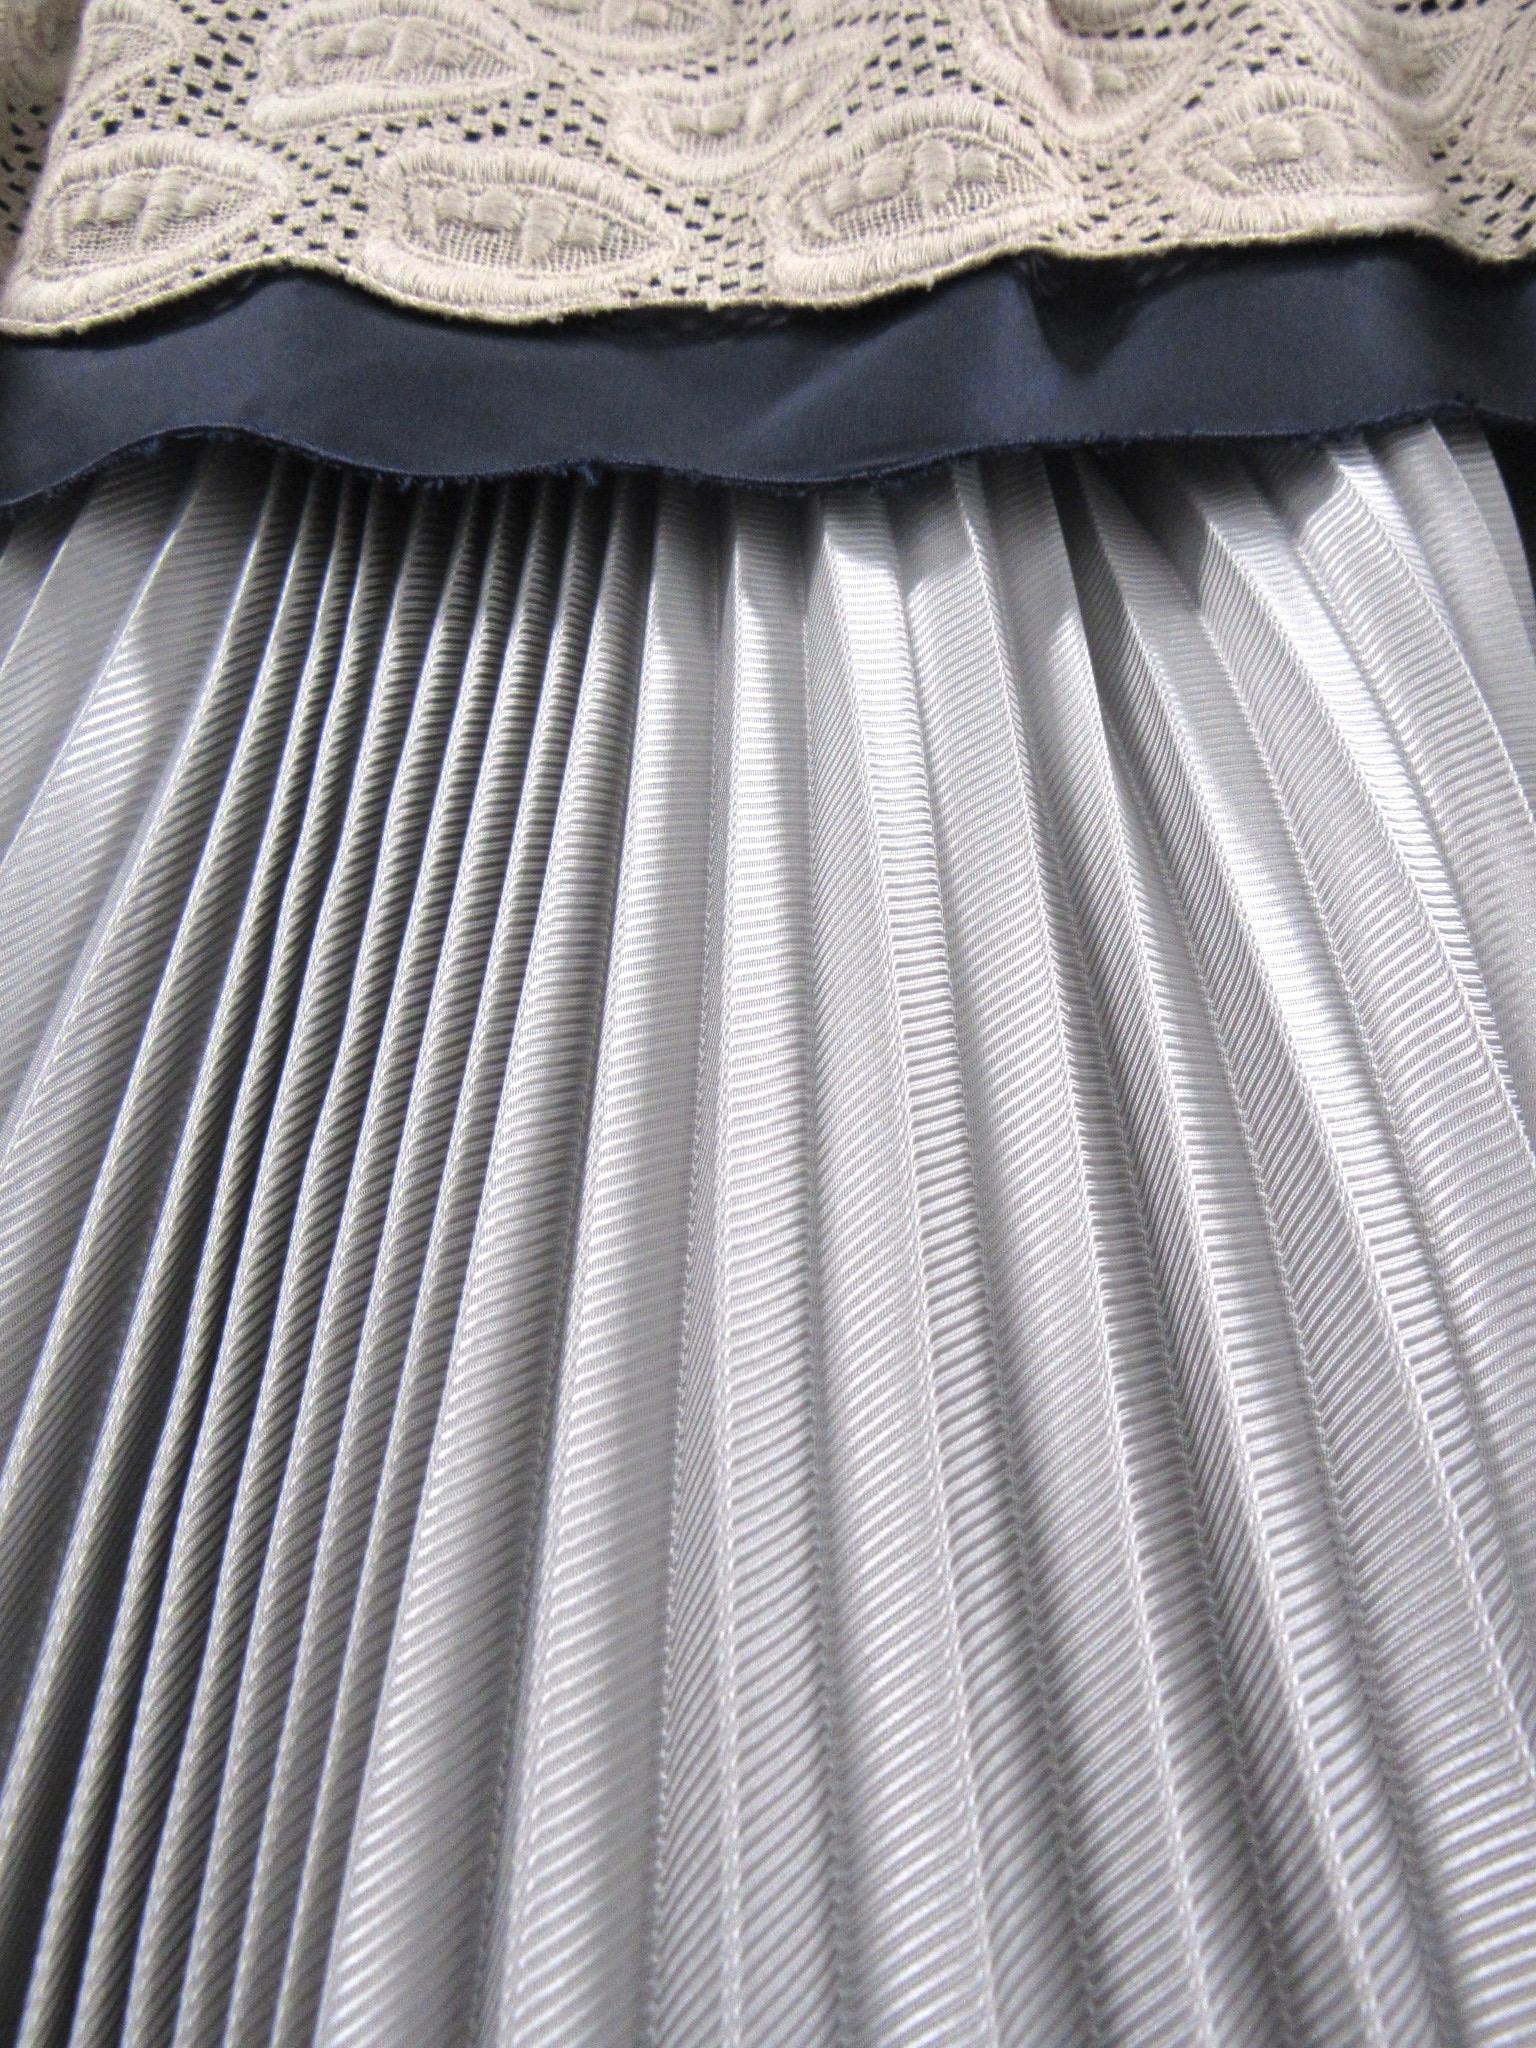 2008 Undercover Strapless Pleated Fang Detail Dress For Sale 3